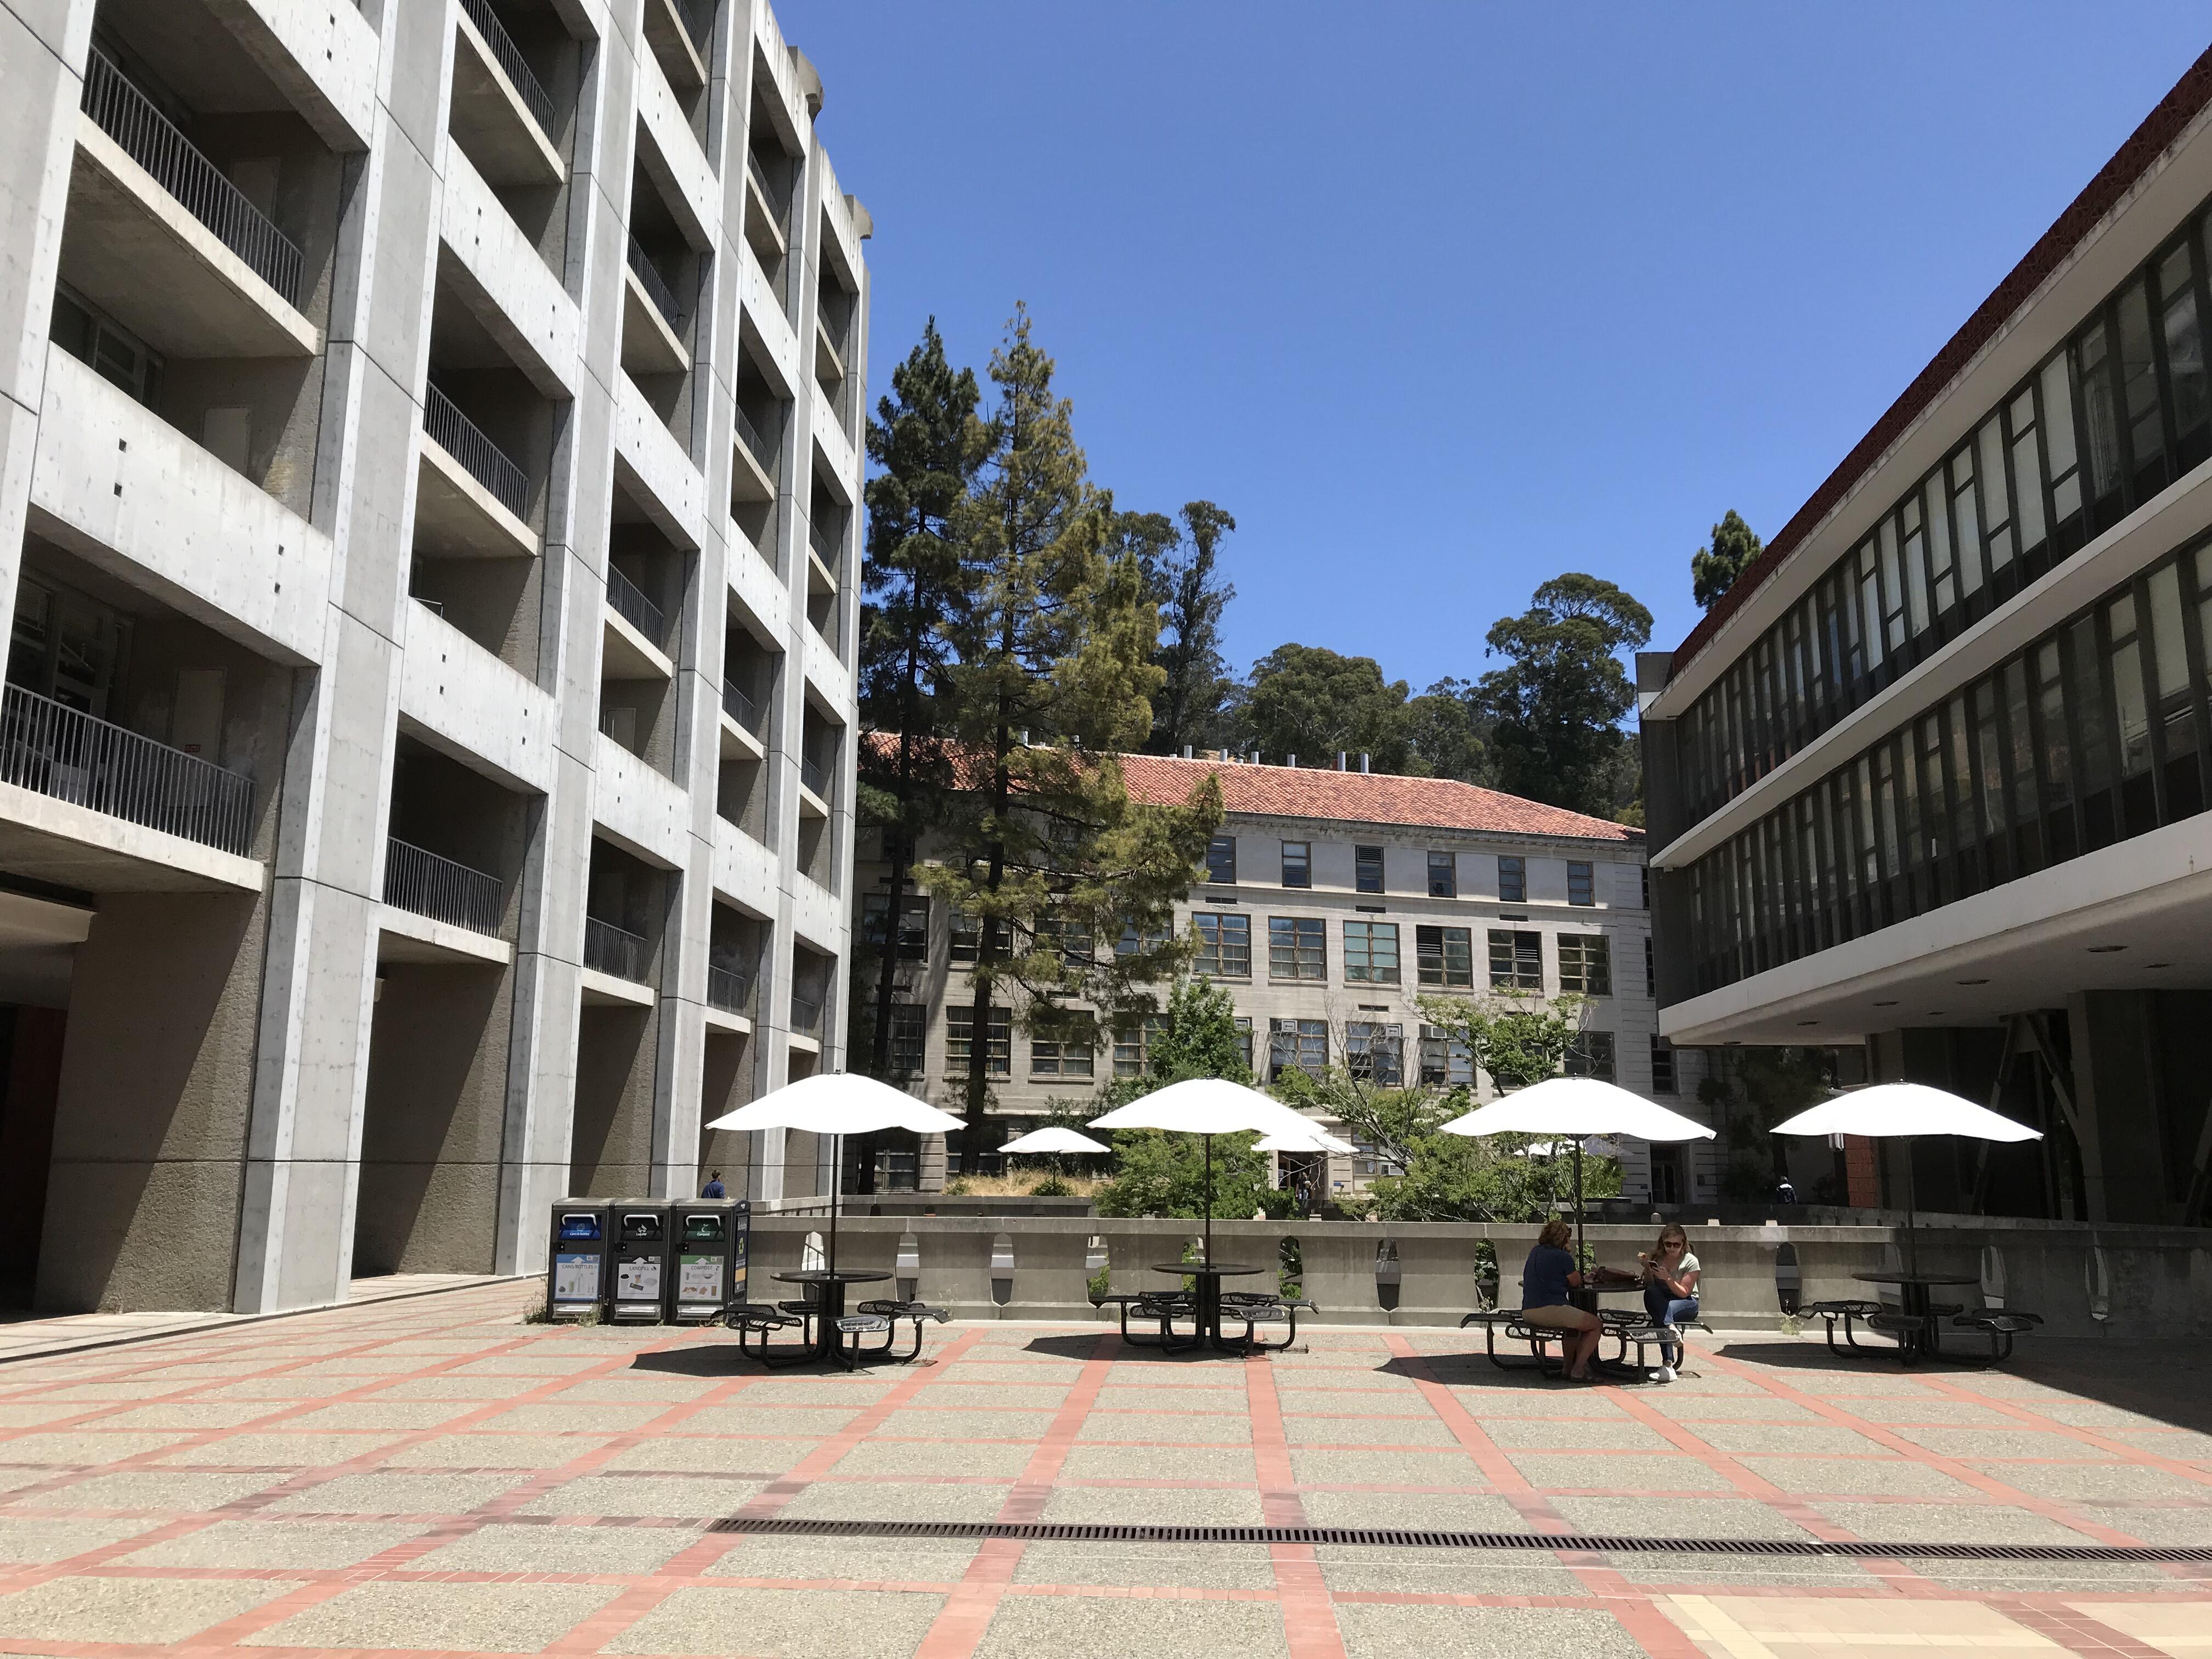 College of Chemistry courtyard